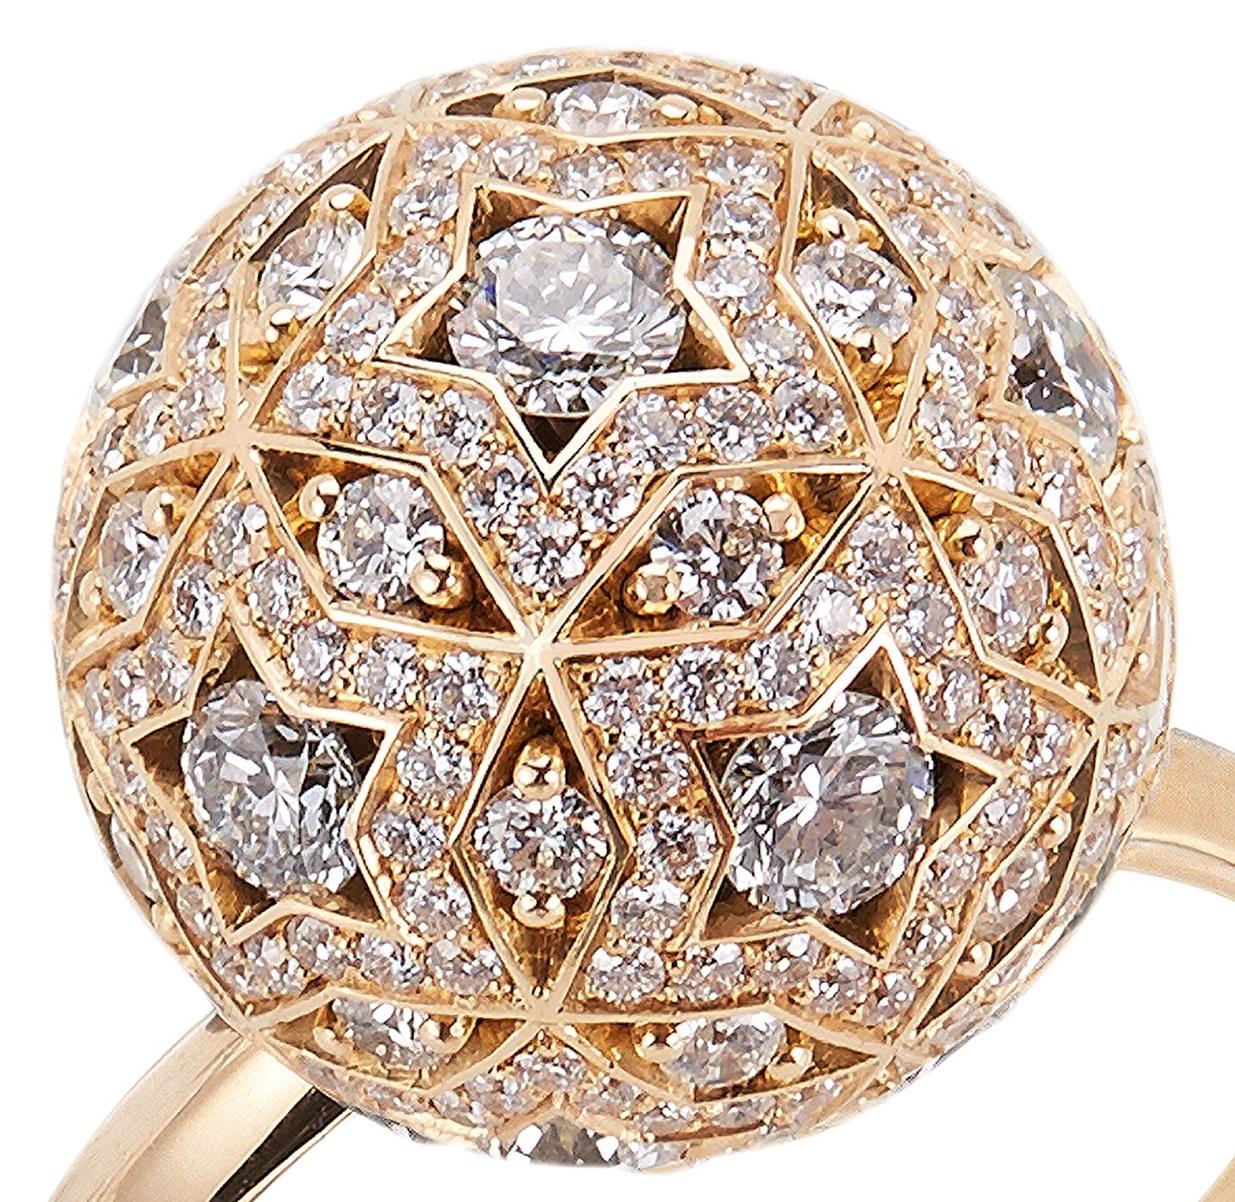 A unique ring design inspired by the constellations of the night sky and created with Hirsh Celestial Movement.

- 256 round cut diamonds weighing approx. 2.15 carat in total
- Created in 18K yellow gold with 28 hidden ruby jewel spheres

This